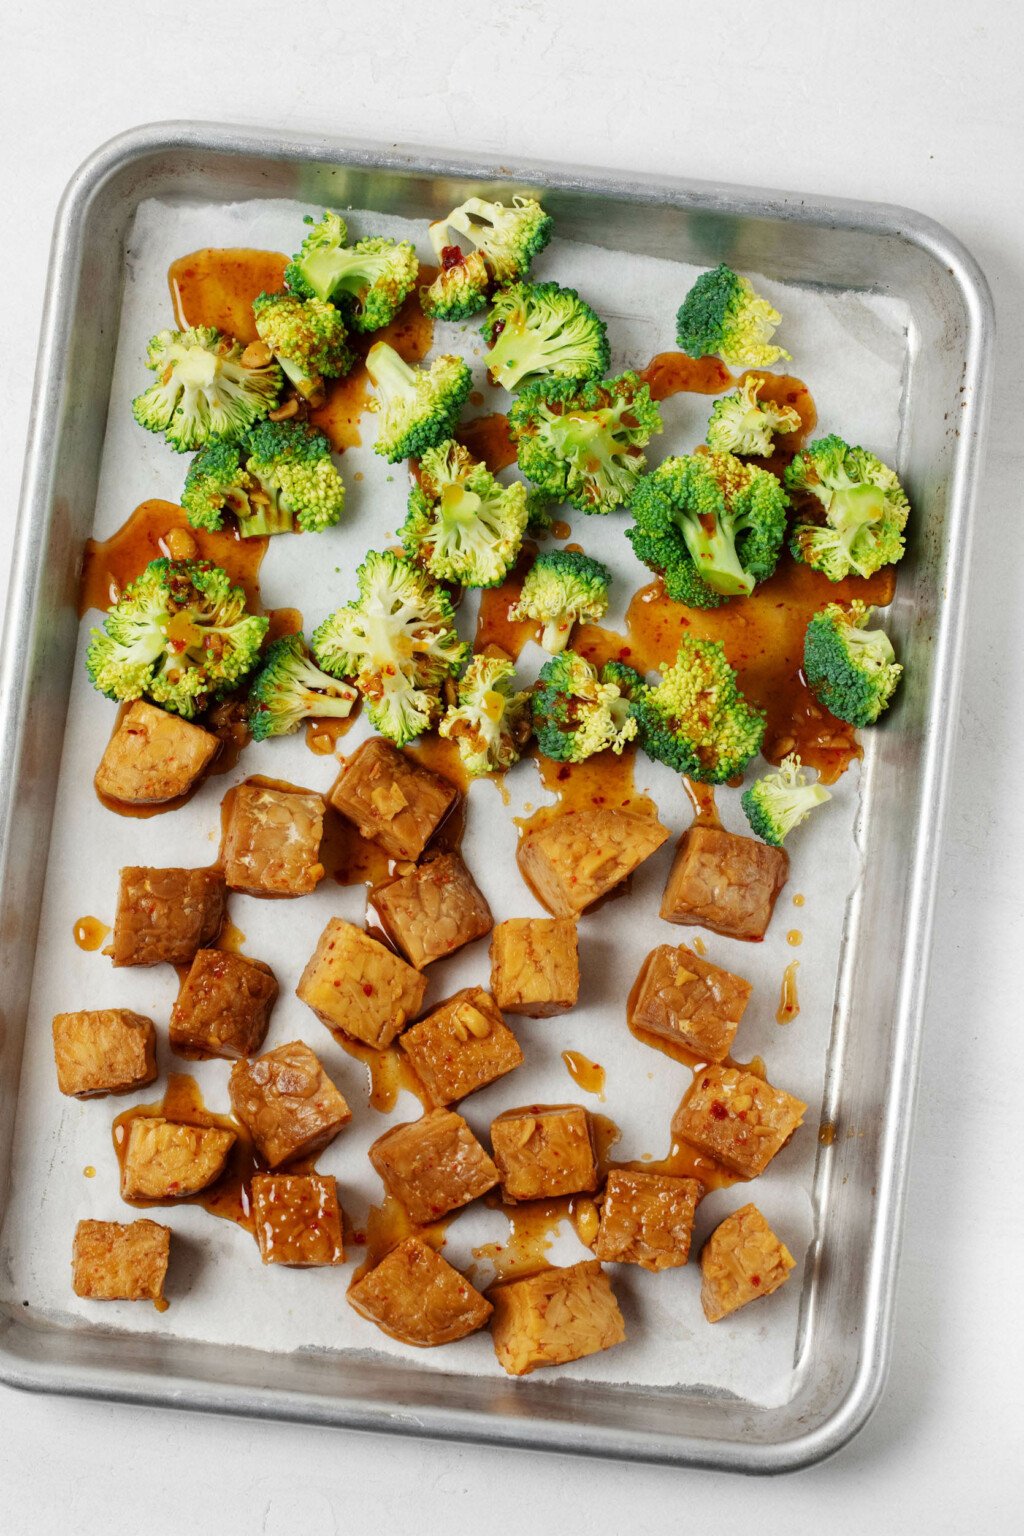 A plant-based protein and broccoli florets are laid out on a metal sheet pan.